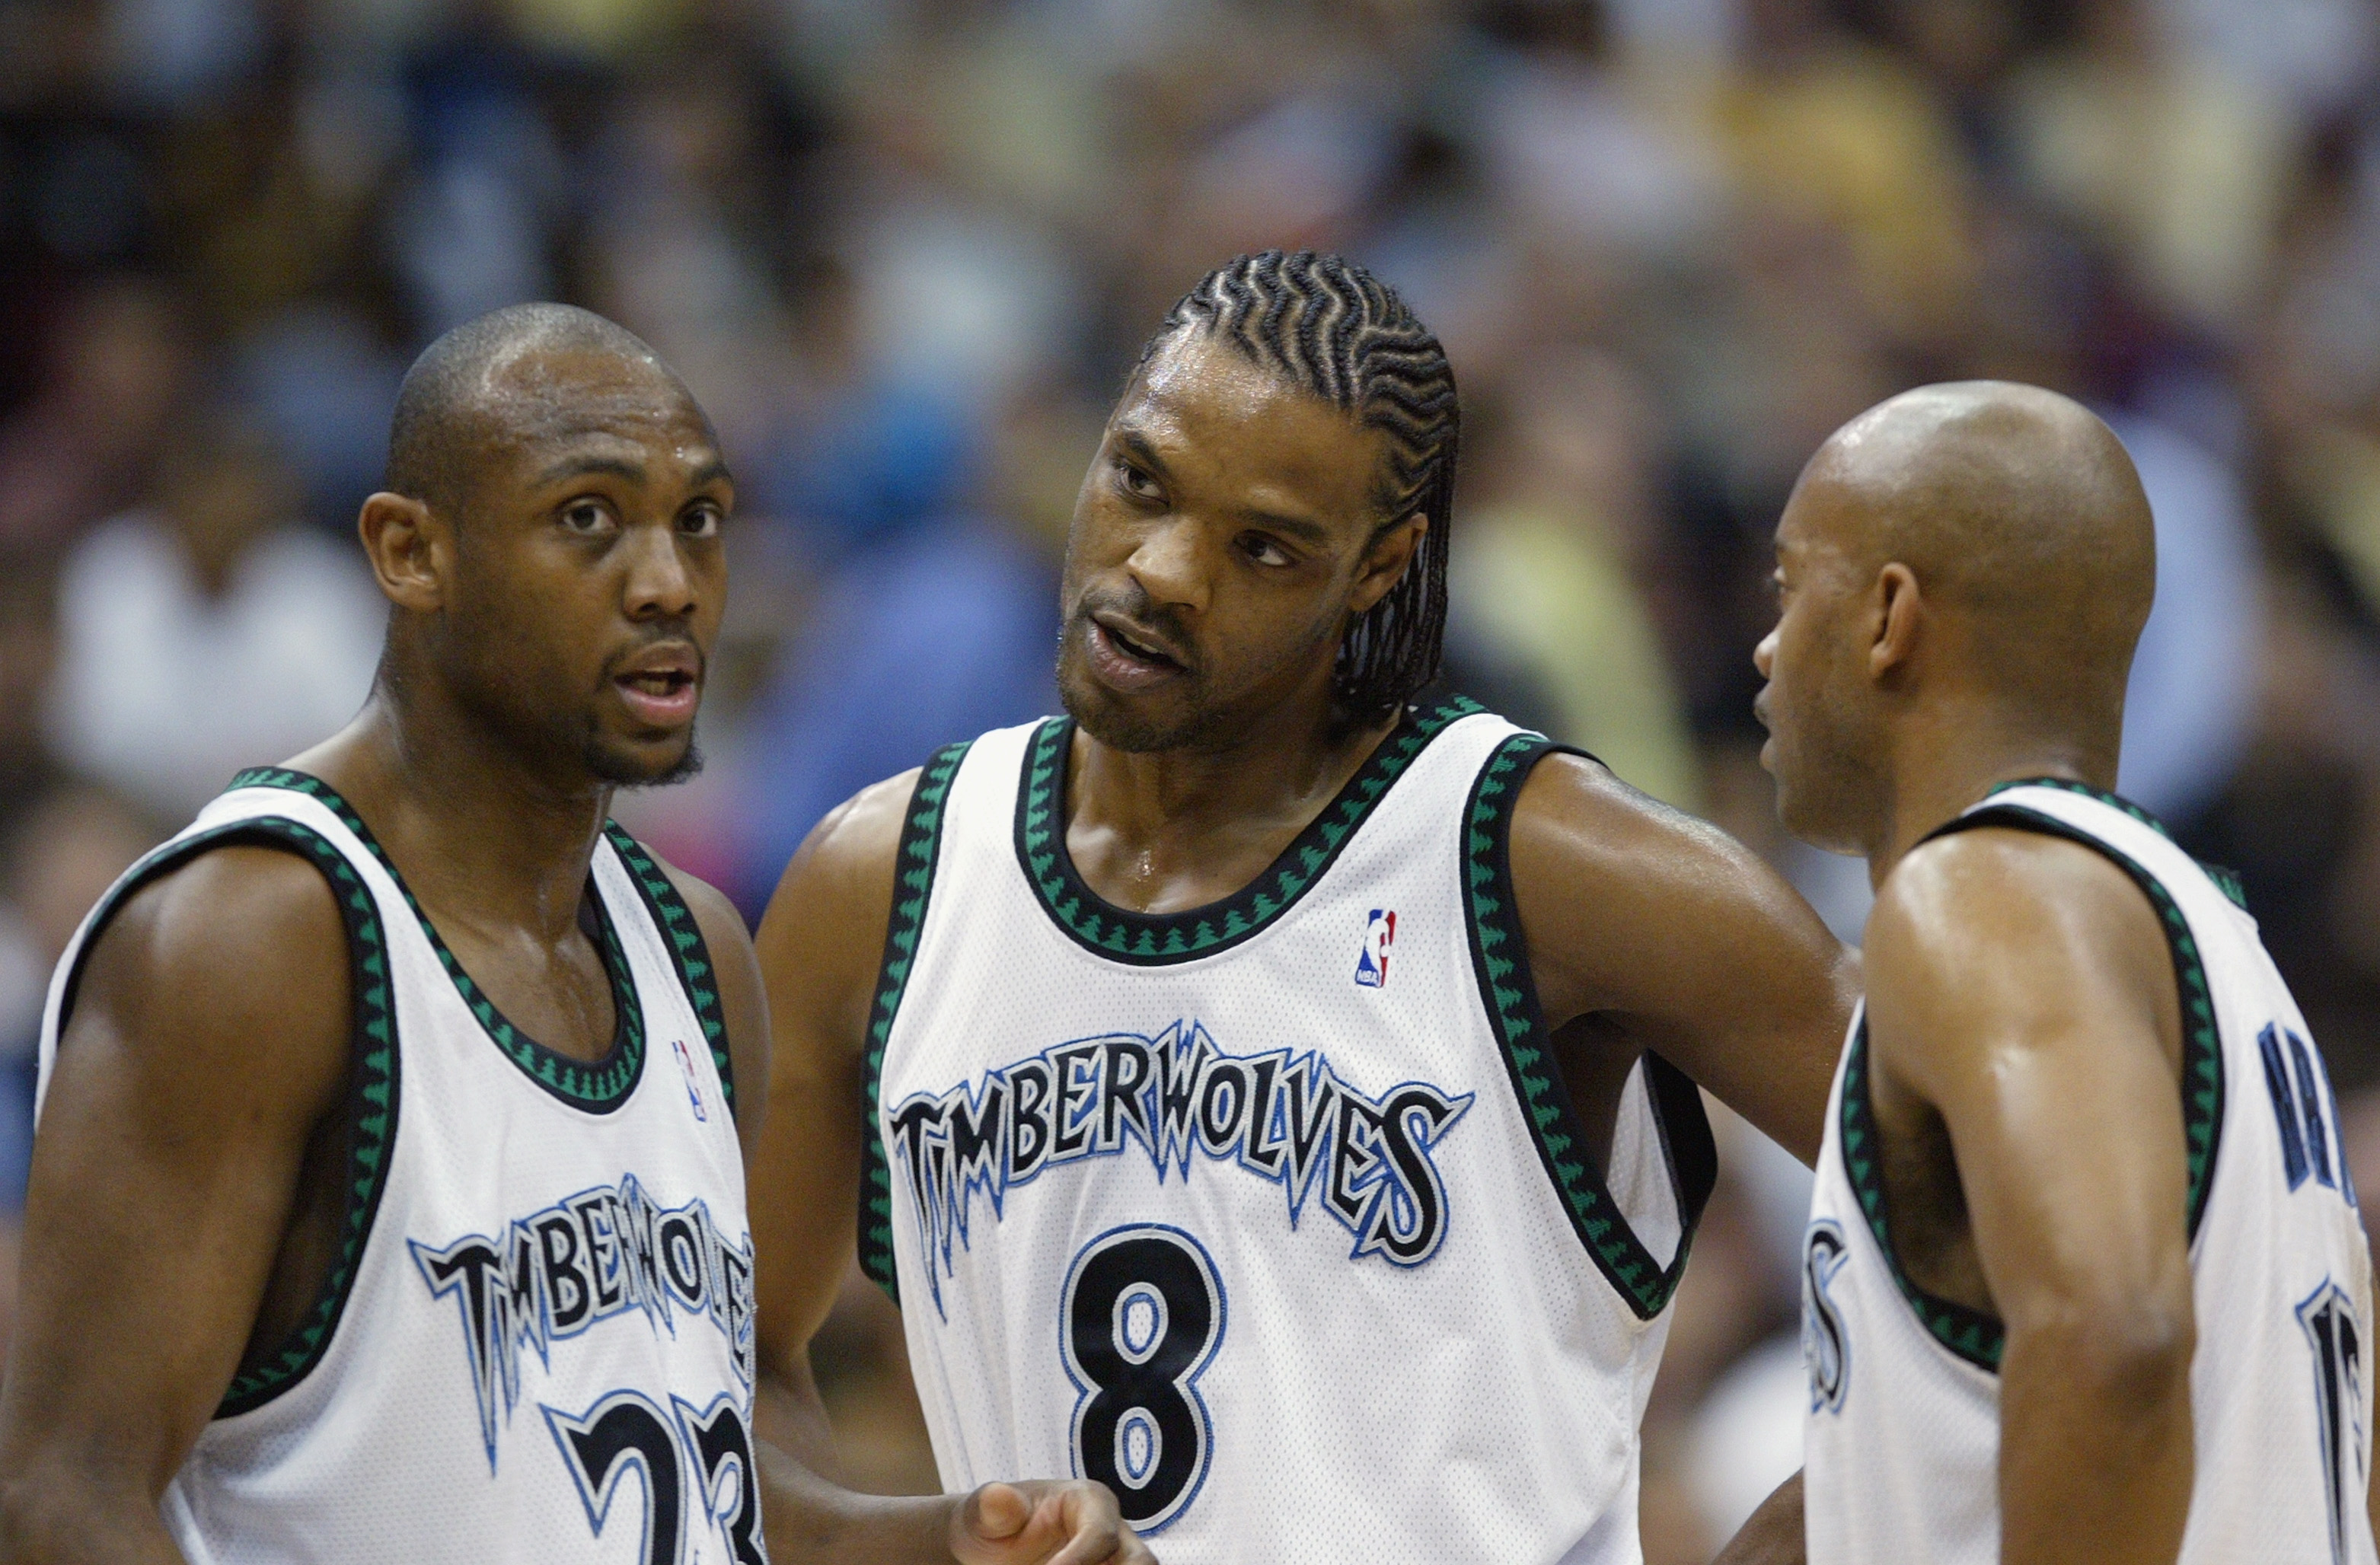 Former NBA Player Latrell Sprewell Laughed at $21 Million and Went Broke Shortly After